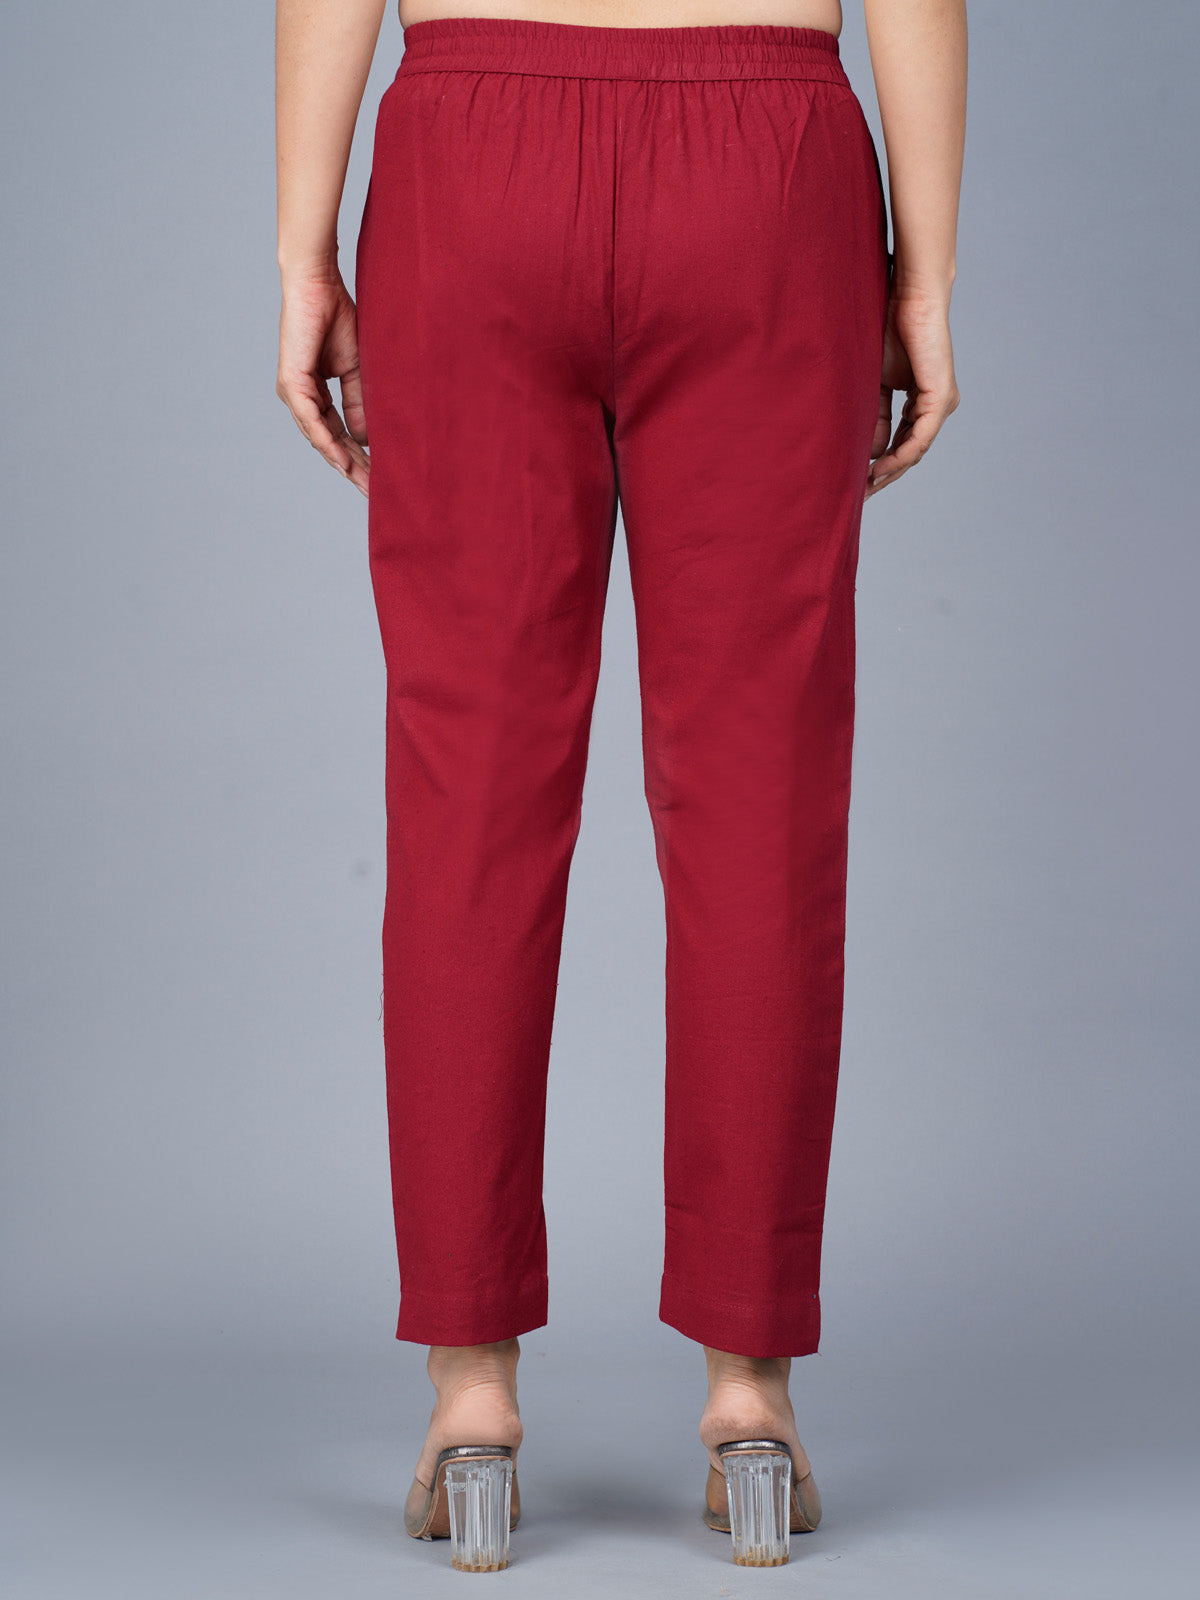 Pack Of 2 Womens Regular Fit Maroon And White Fully Elastic Waistband Cotton Trouser